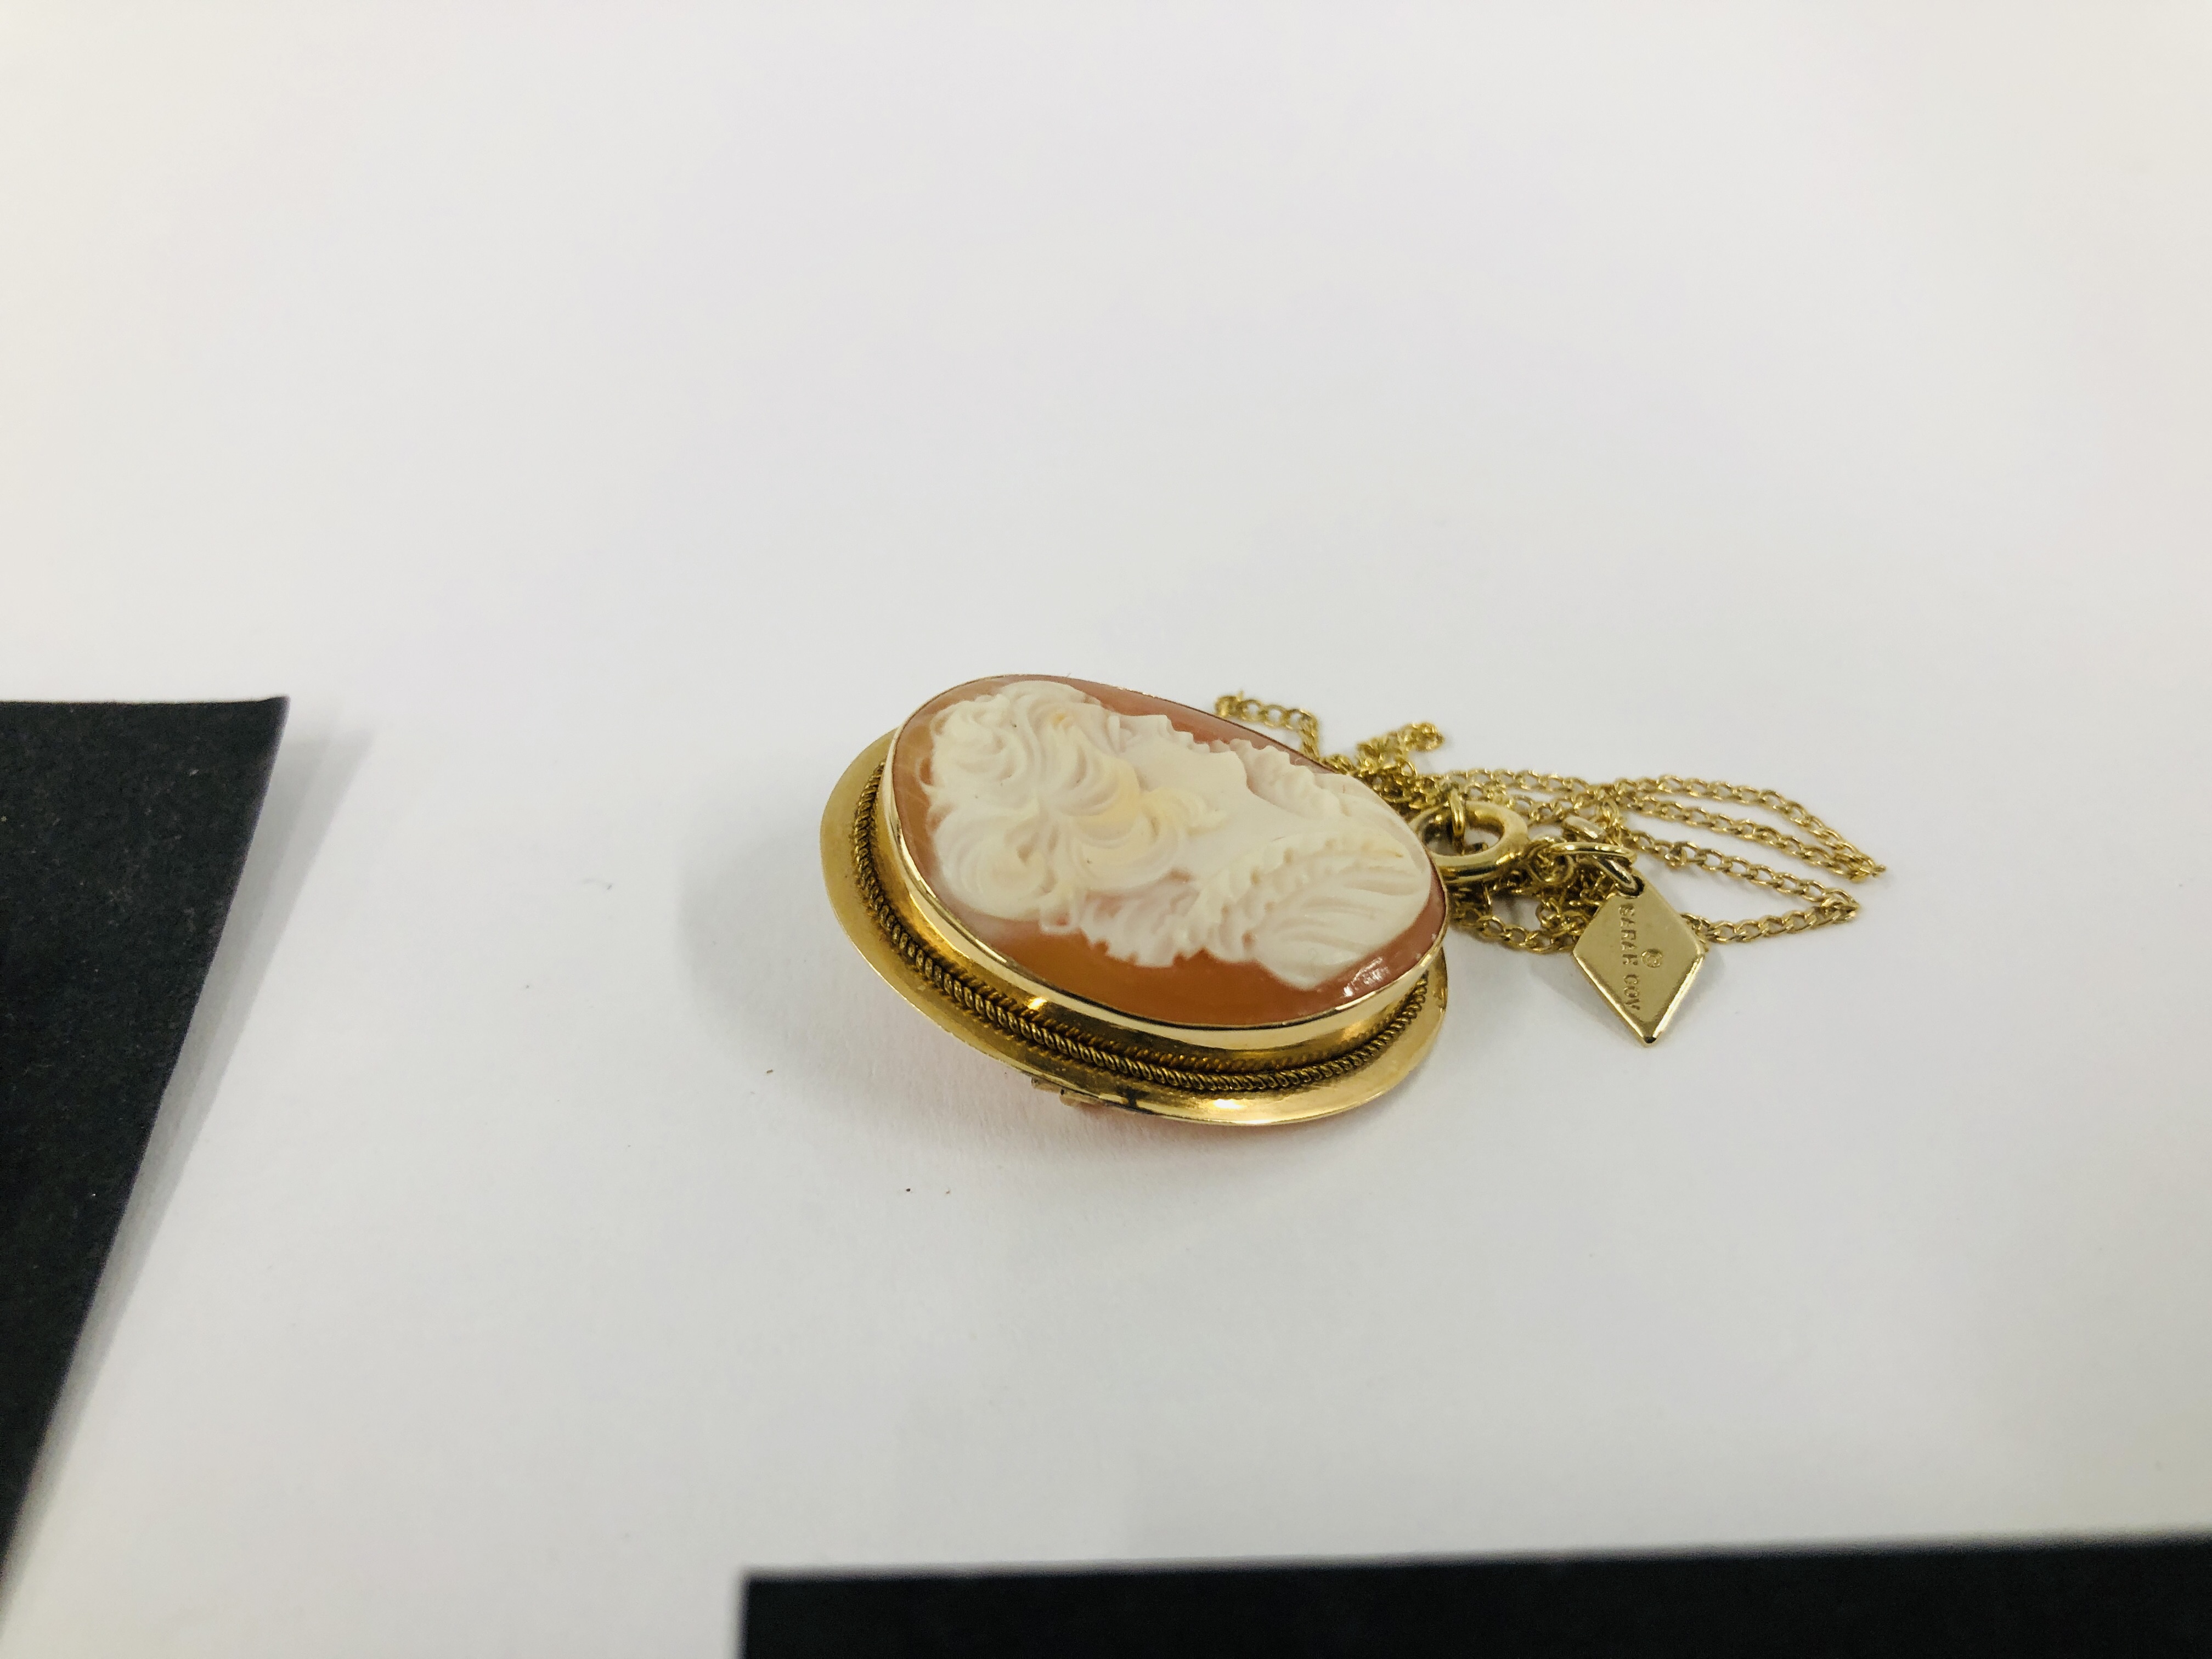 A CAMEO PENDANT BROOCH MARKED 14K ON A MODERN CHAIN ALONG WITH FIVE PAIRS OF STUD STYLE EARRINGS TO - Image 6 of 7